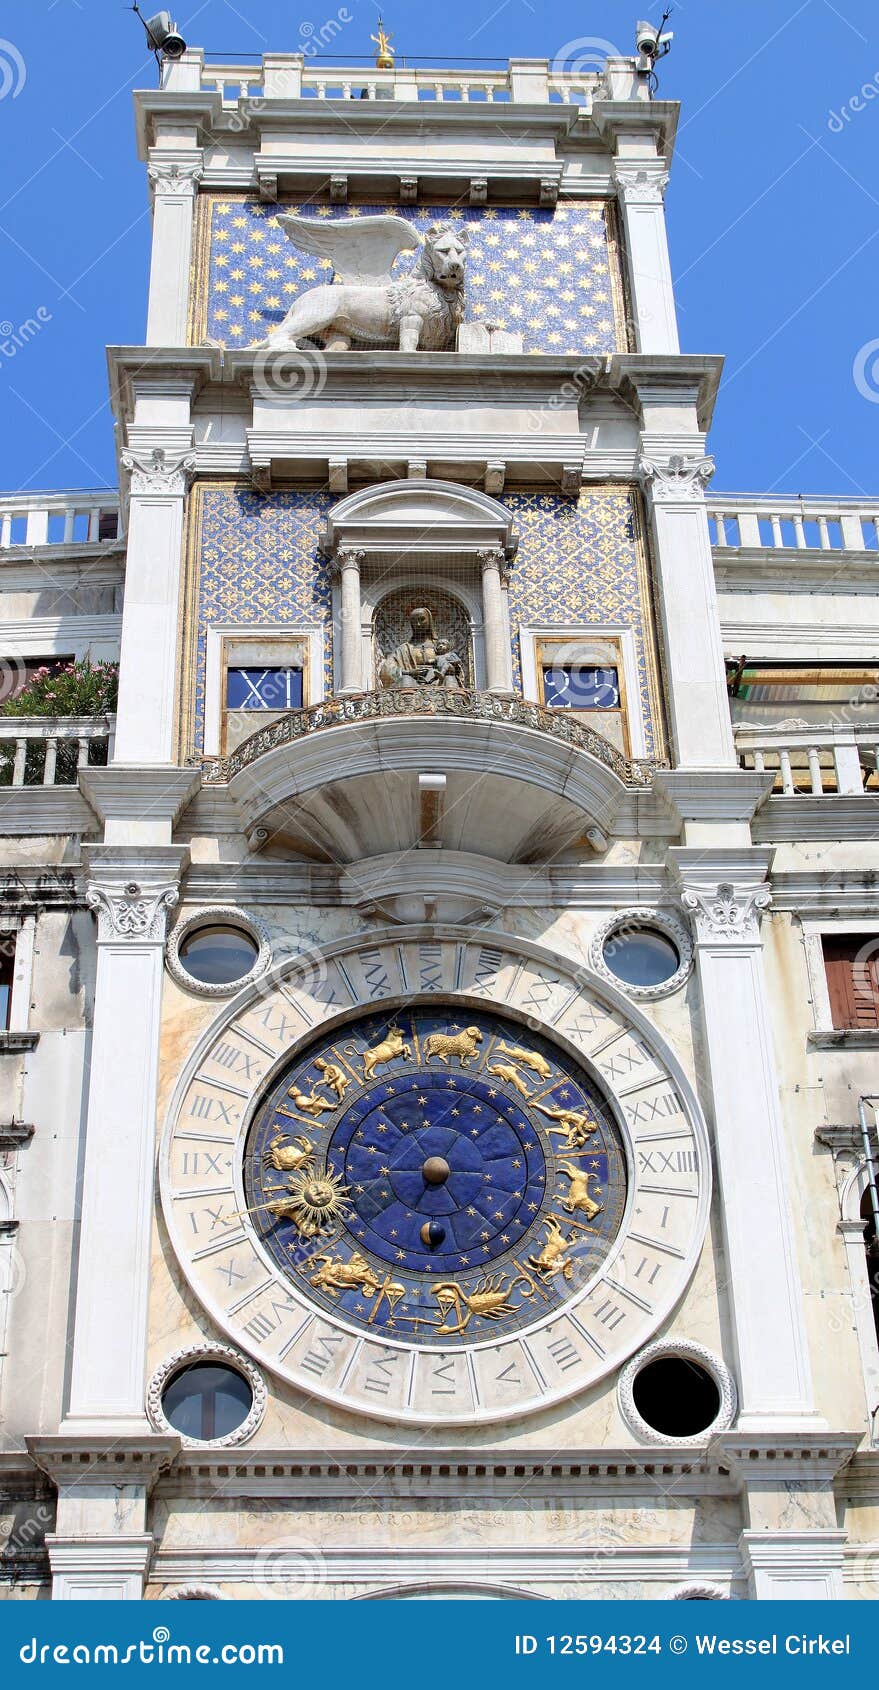 torre dell orologio or st marks clocktower, venice